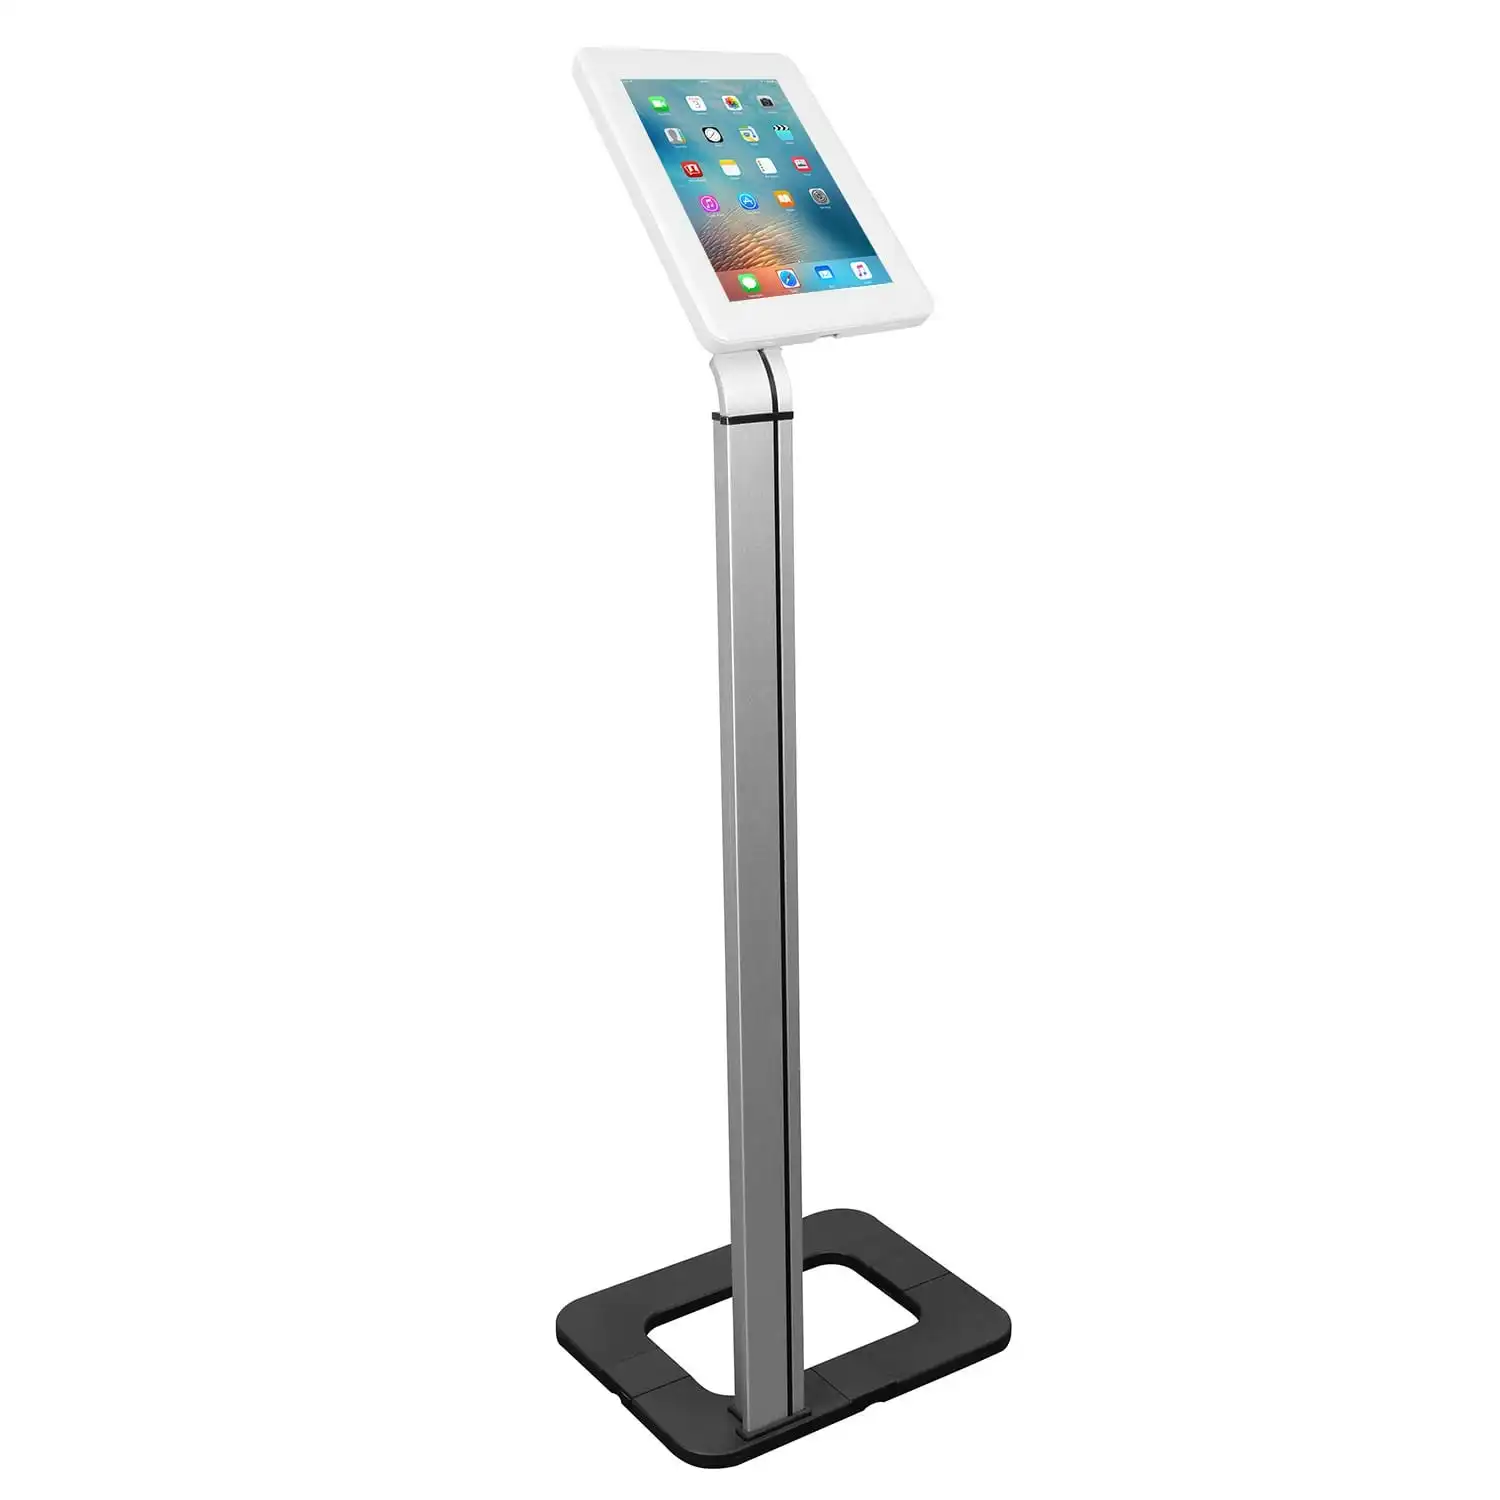 Brateck Anti-theft Tablet Kiosk Floor Stand 9.7  To 10.1  - Grey